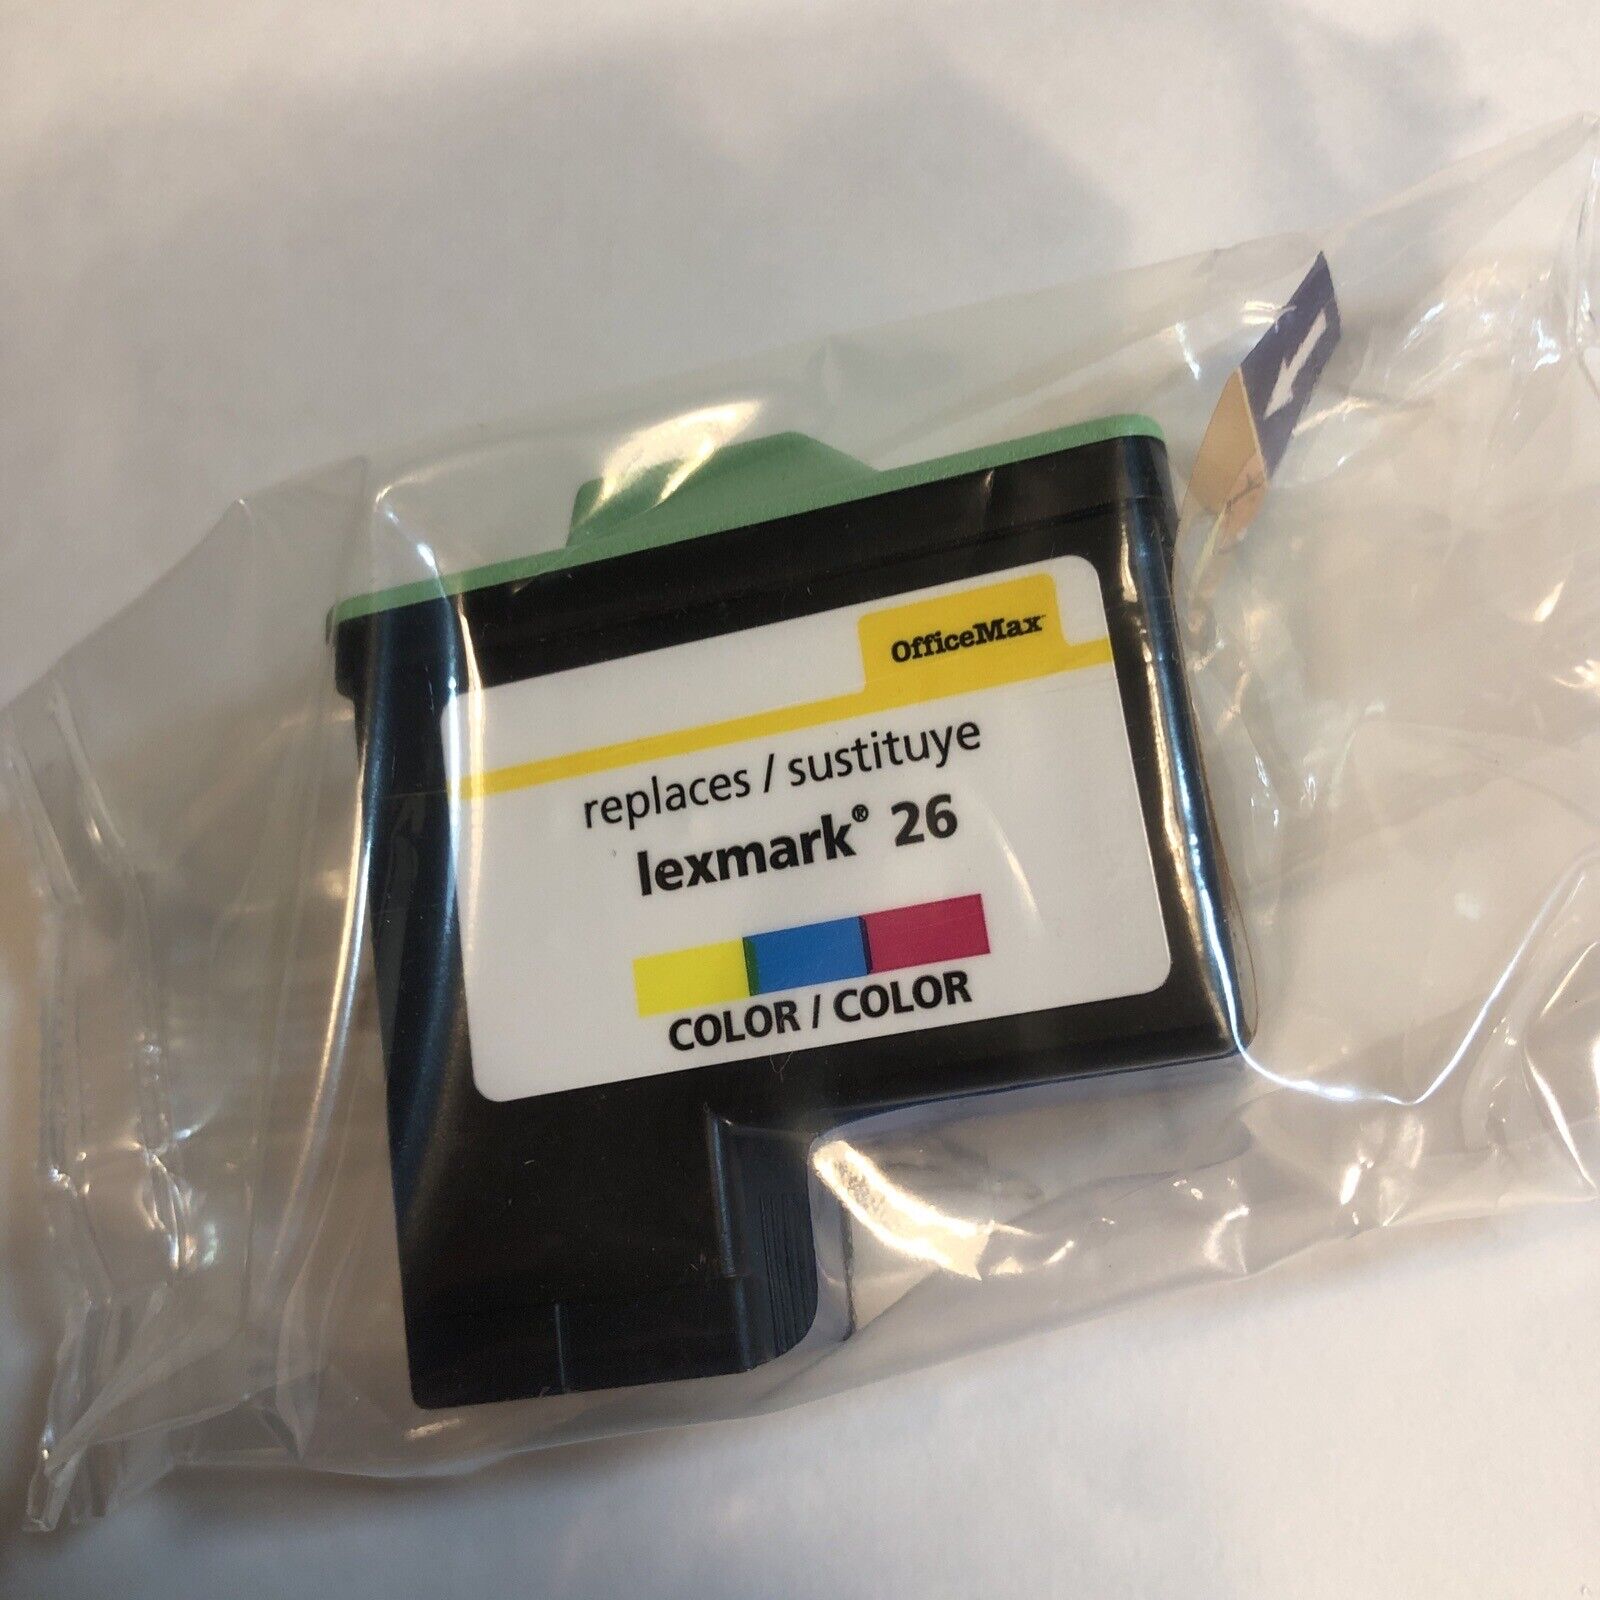 LEXMARK #26 COLOR PRINT CARTRIDGE By Office Max